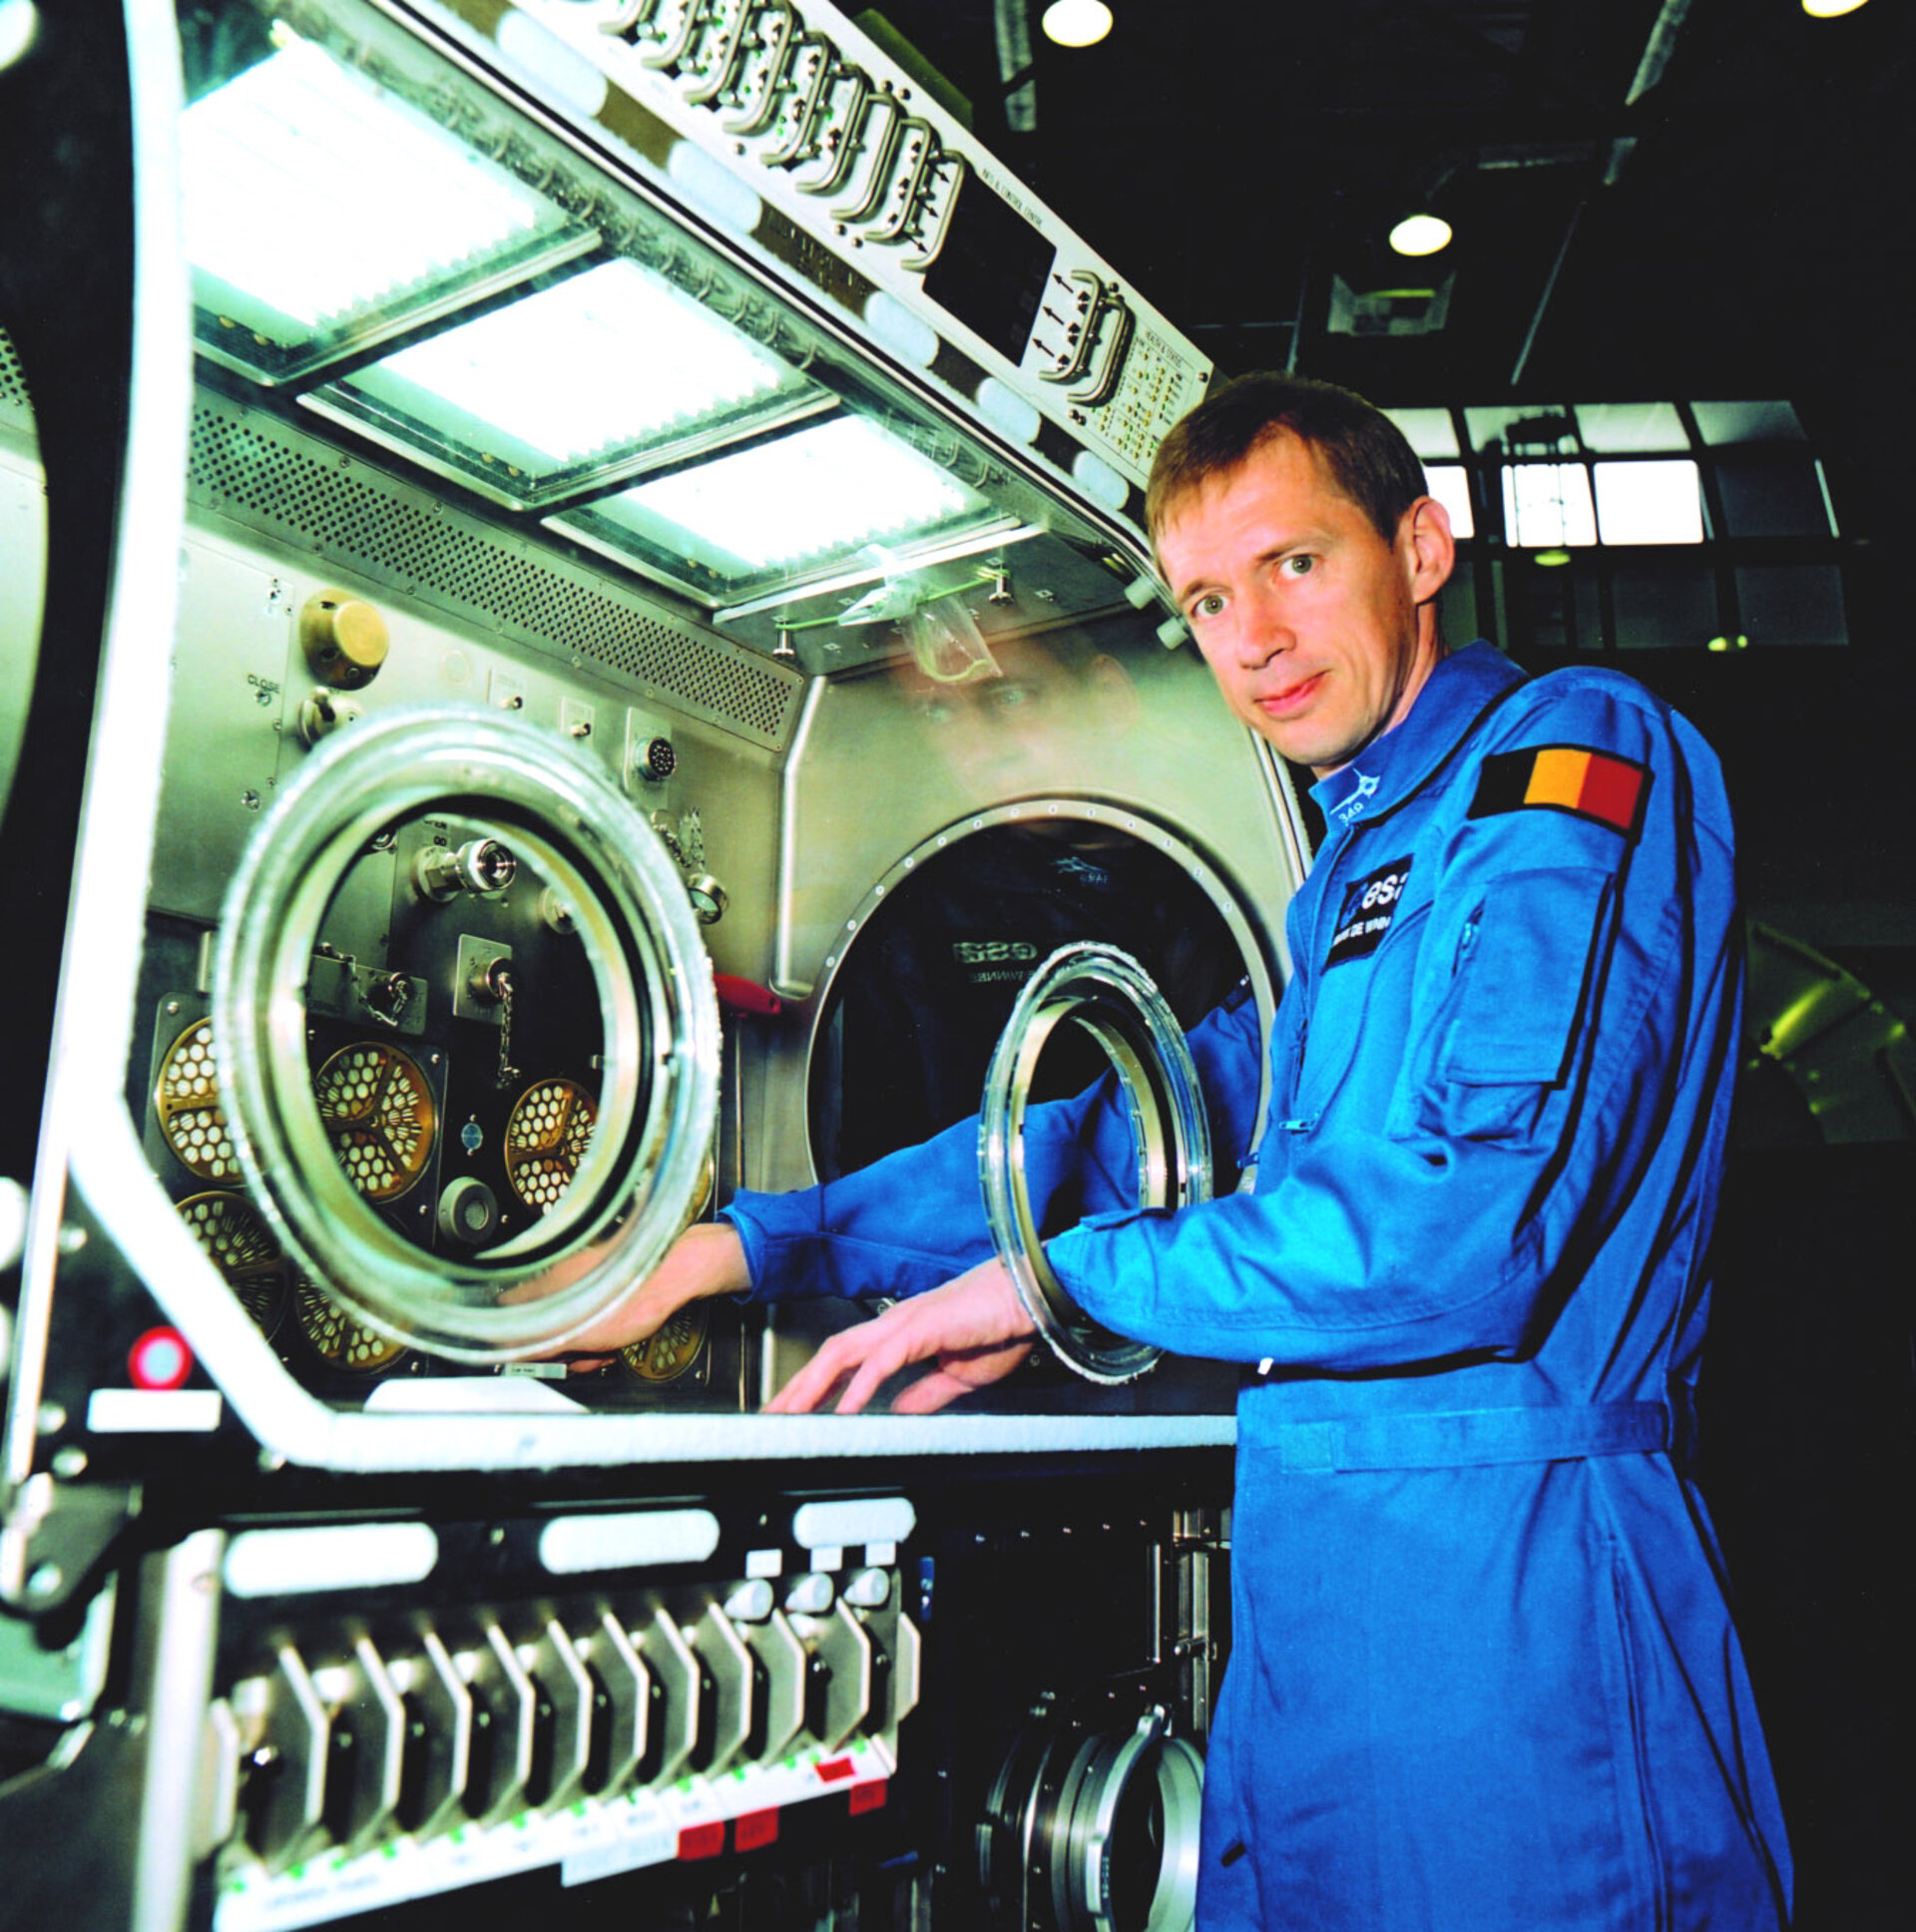 Frank De Winne at ESTEC with the Microgravity Science Glovebox (MSG) training model